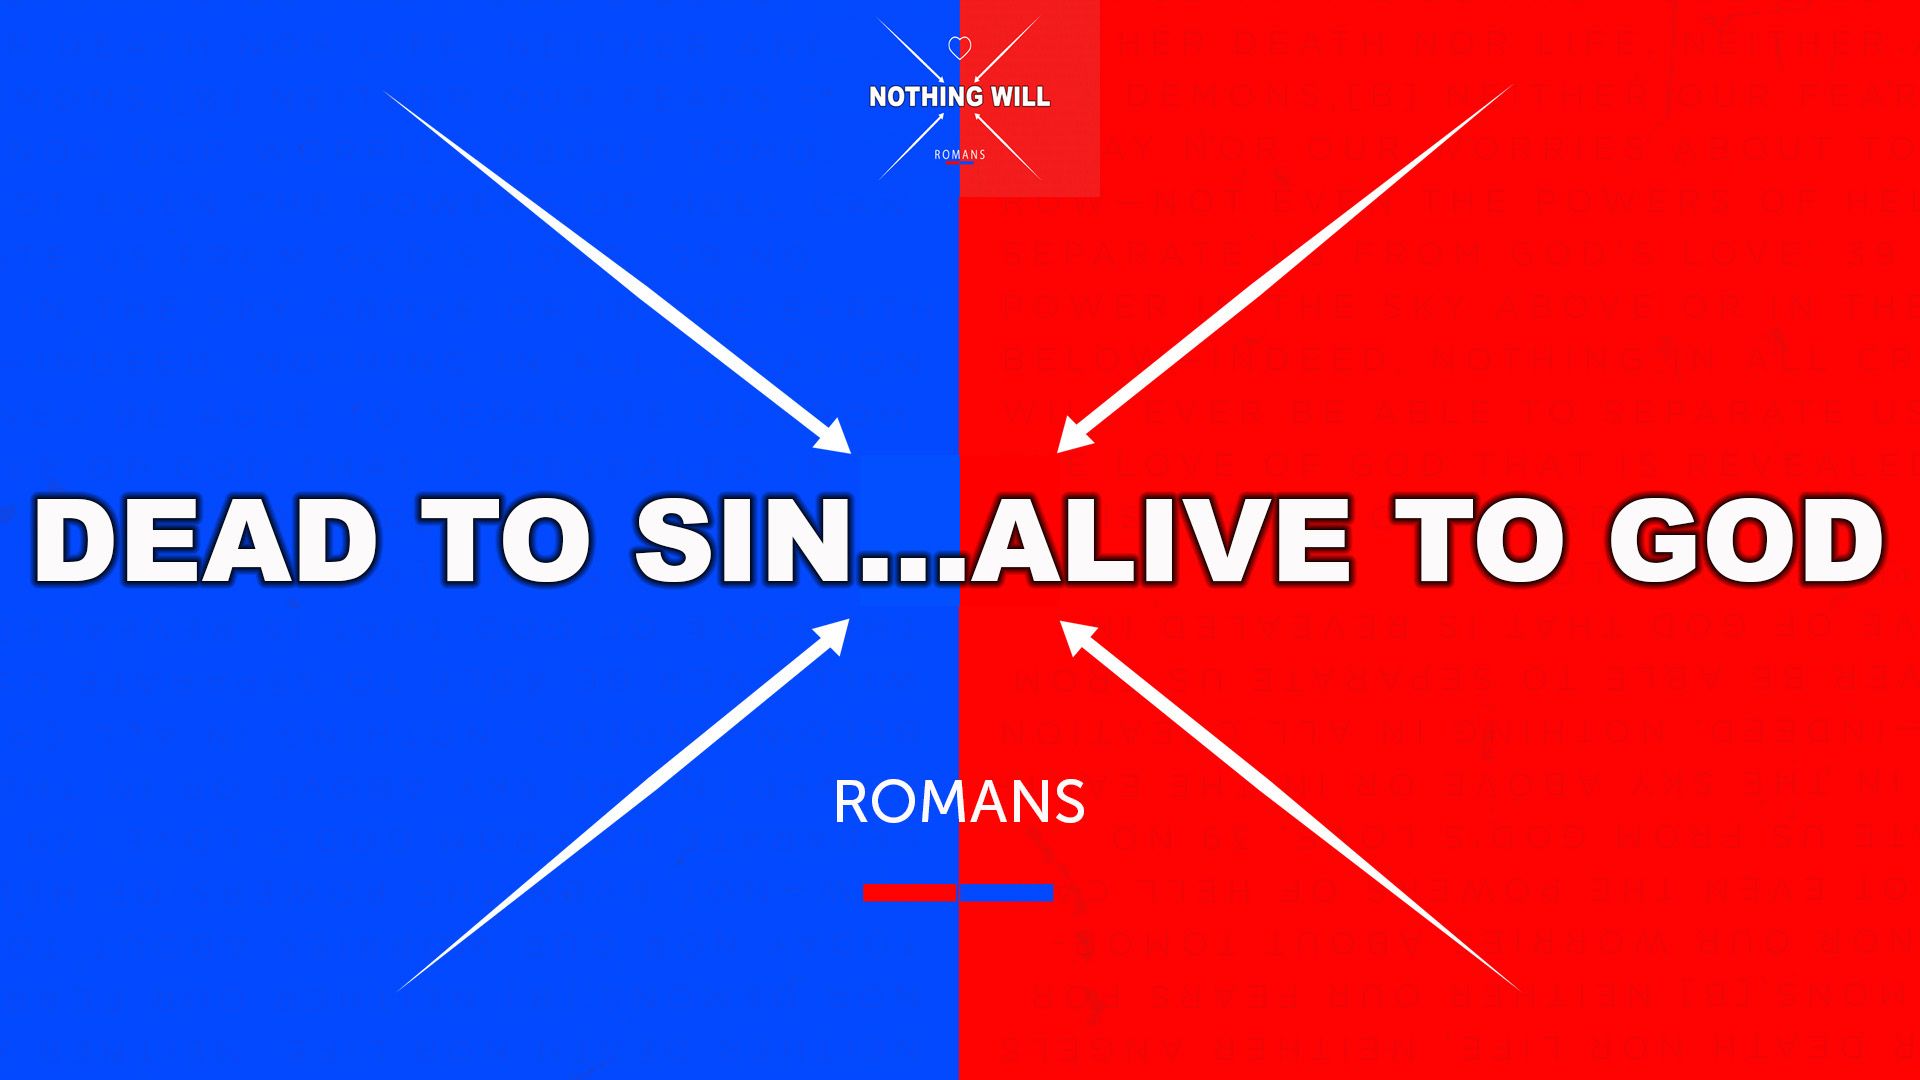 Gregg Travis: Romans | Nothing Will | Dead to Sin...Alive To God (03/13/16)